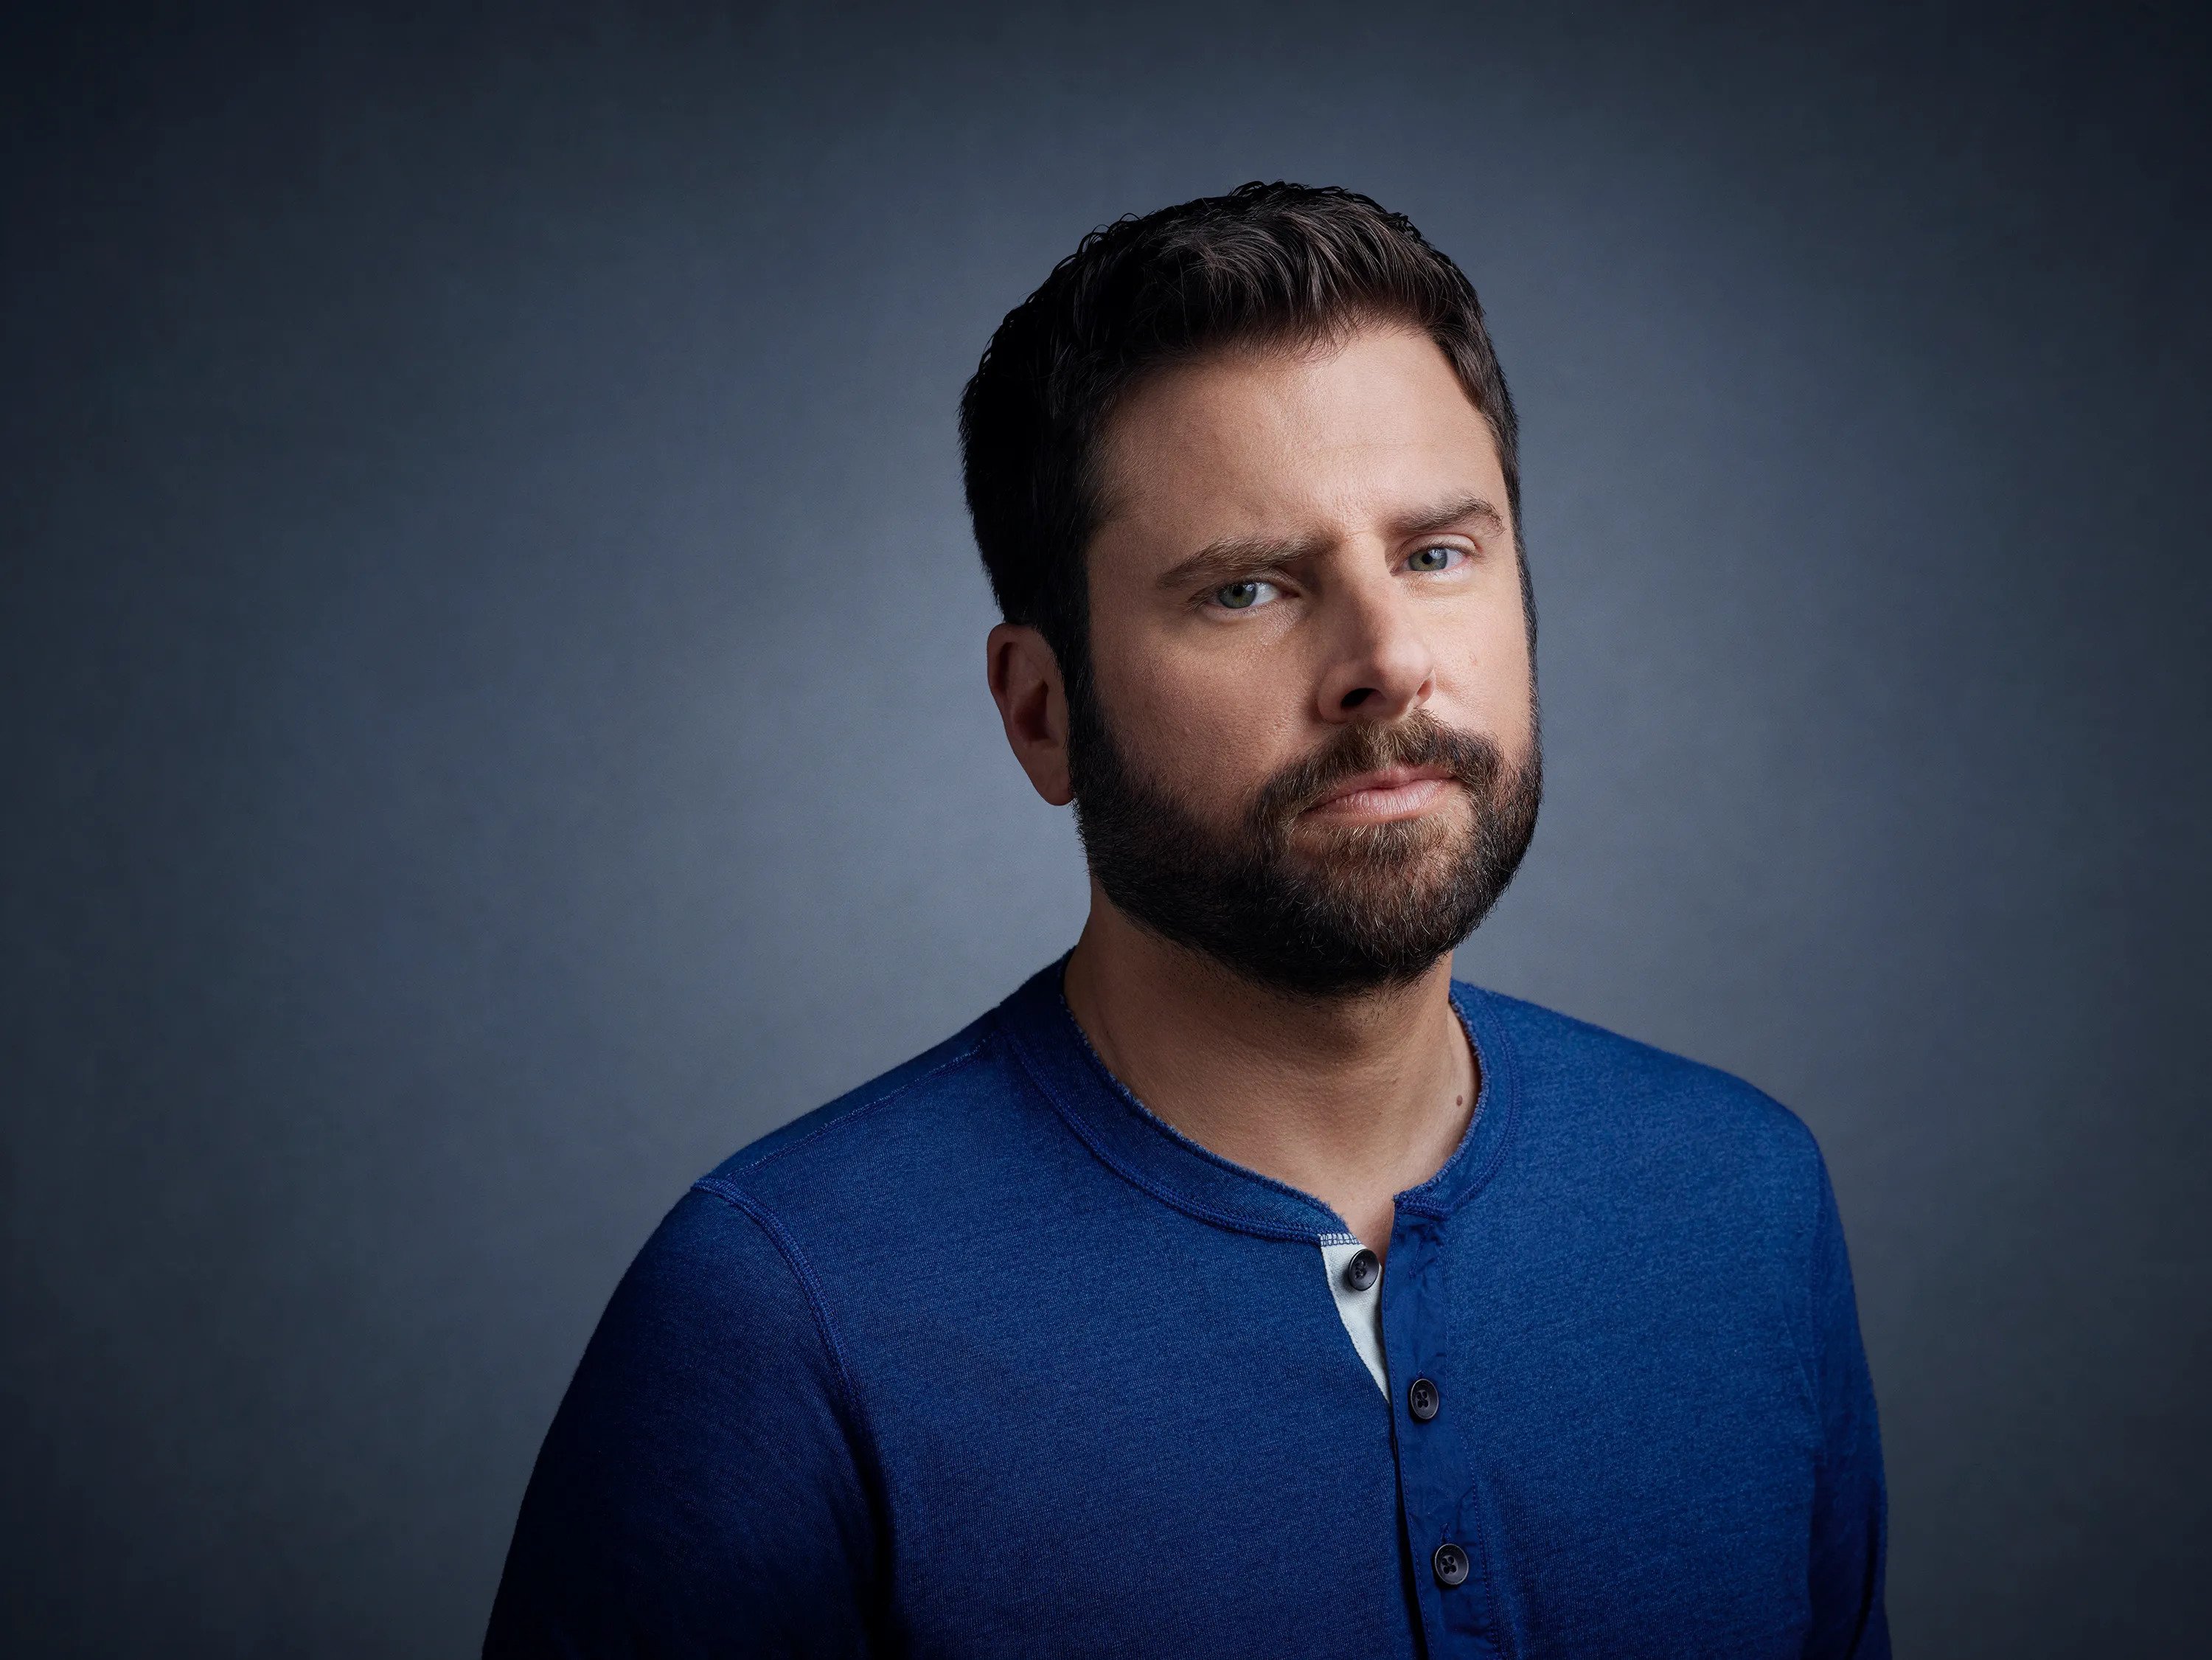 James Roday Heart Attack: Did The Heart Surgery Lead To His Chest Scar?